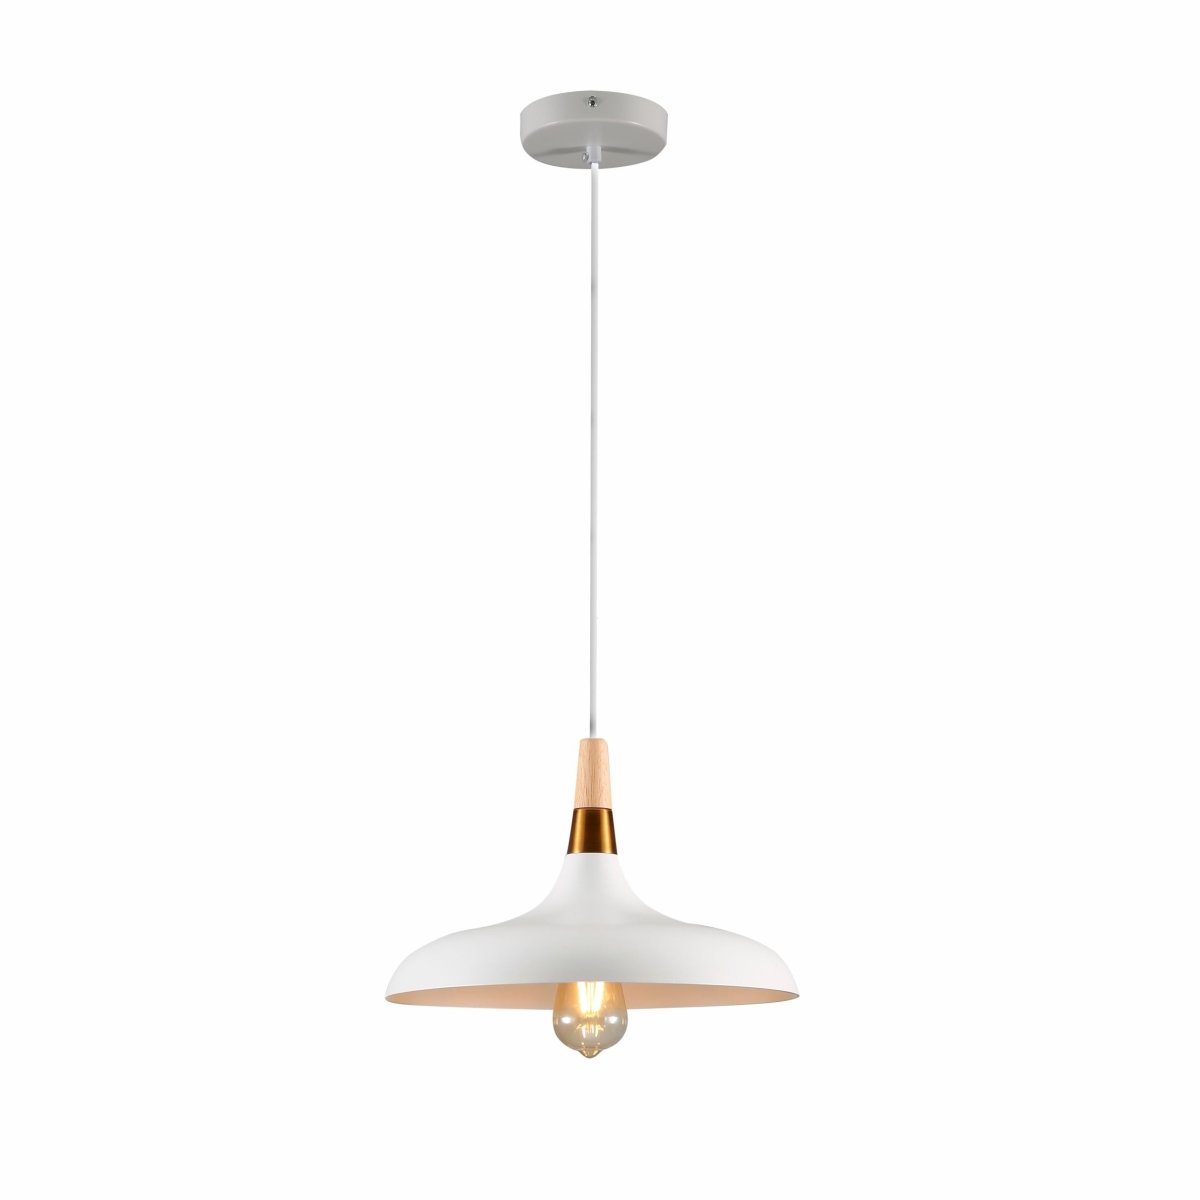 Main image of White Flat Dome Wood Gold Top Metal Ceiling Pendant Light with E27 Fitting | TEKLED 150-18378